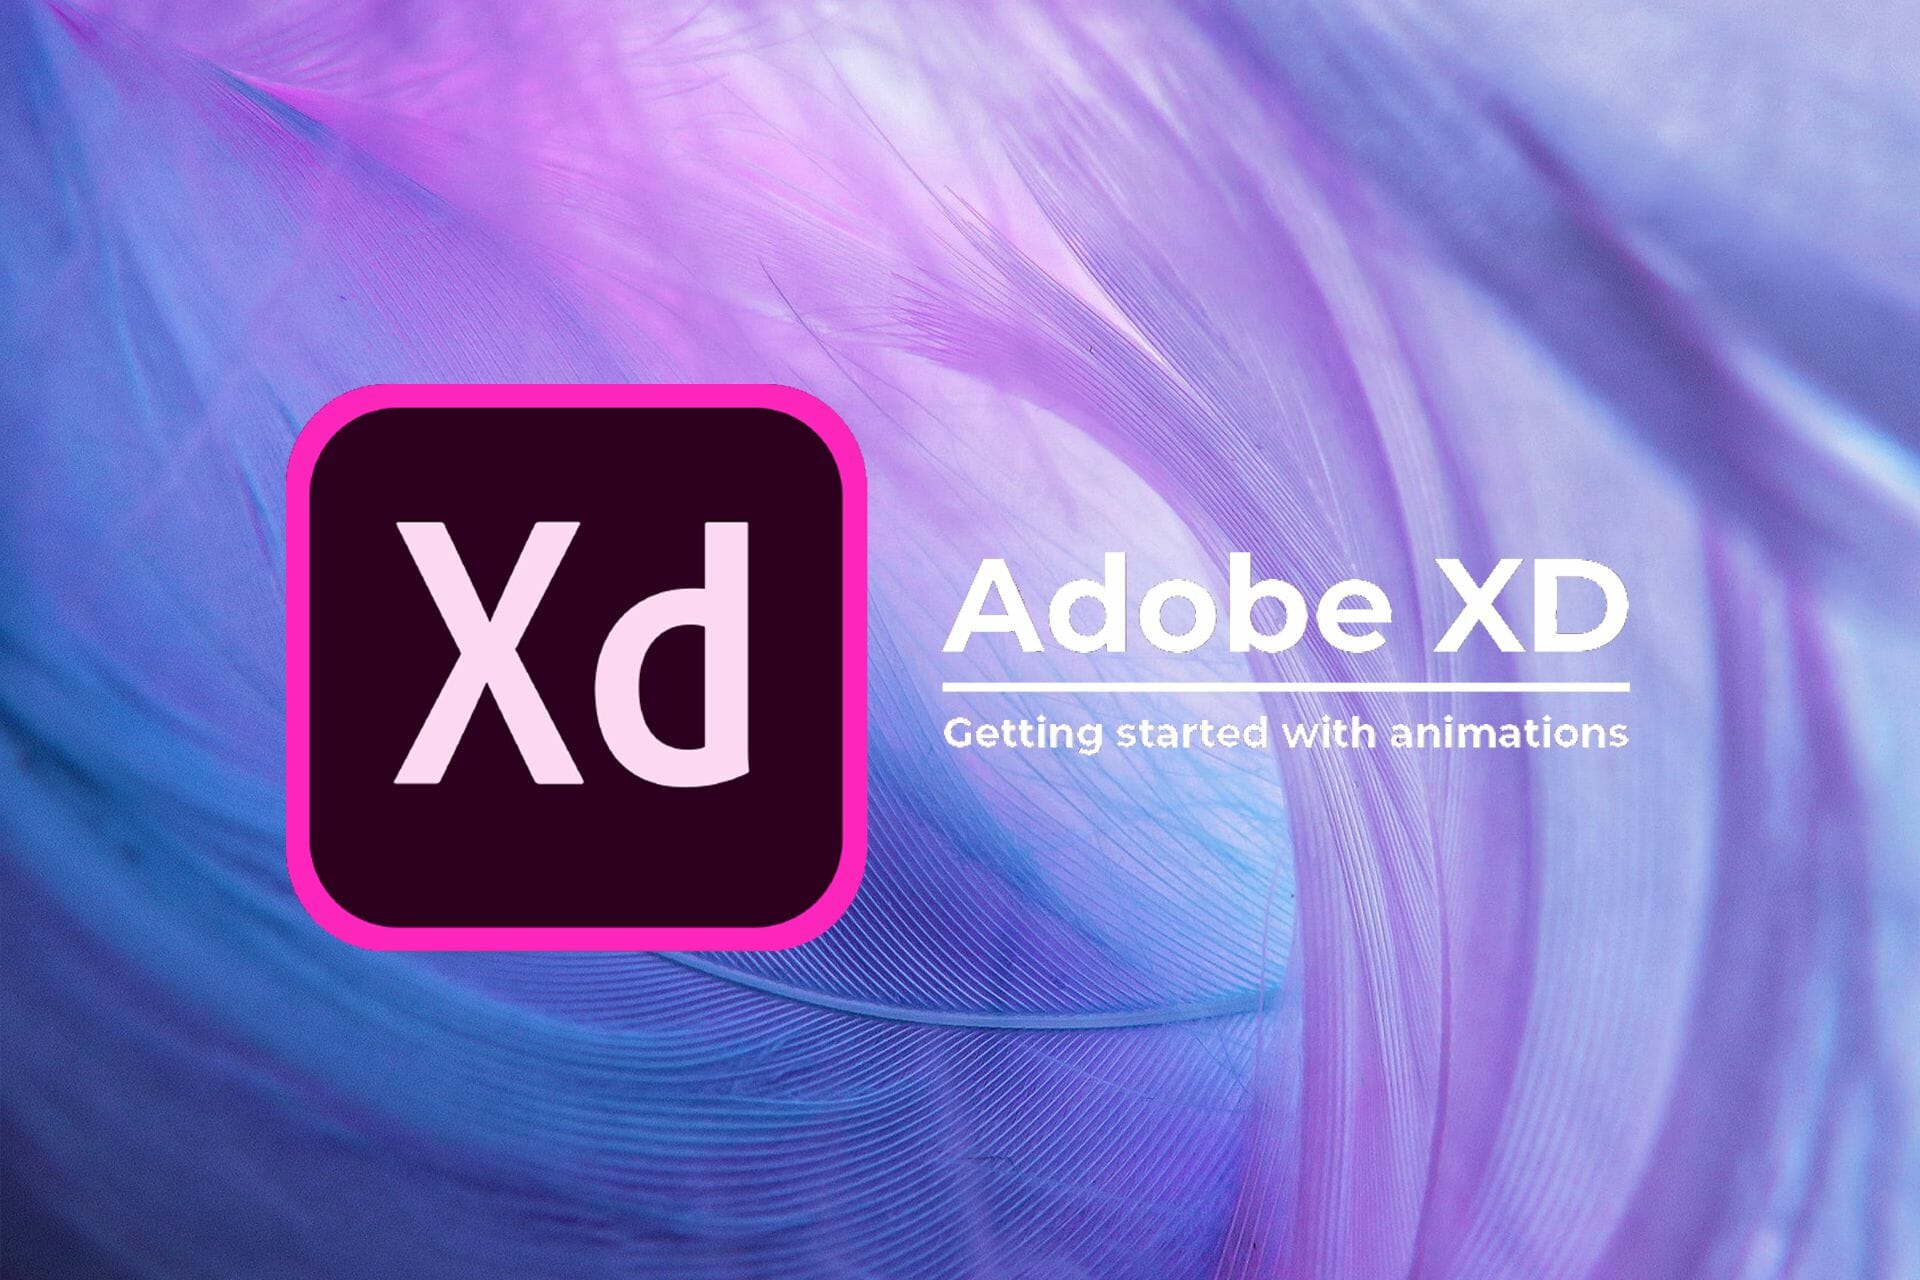 How to install Adobe XD without Creative Cloud